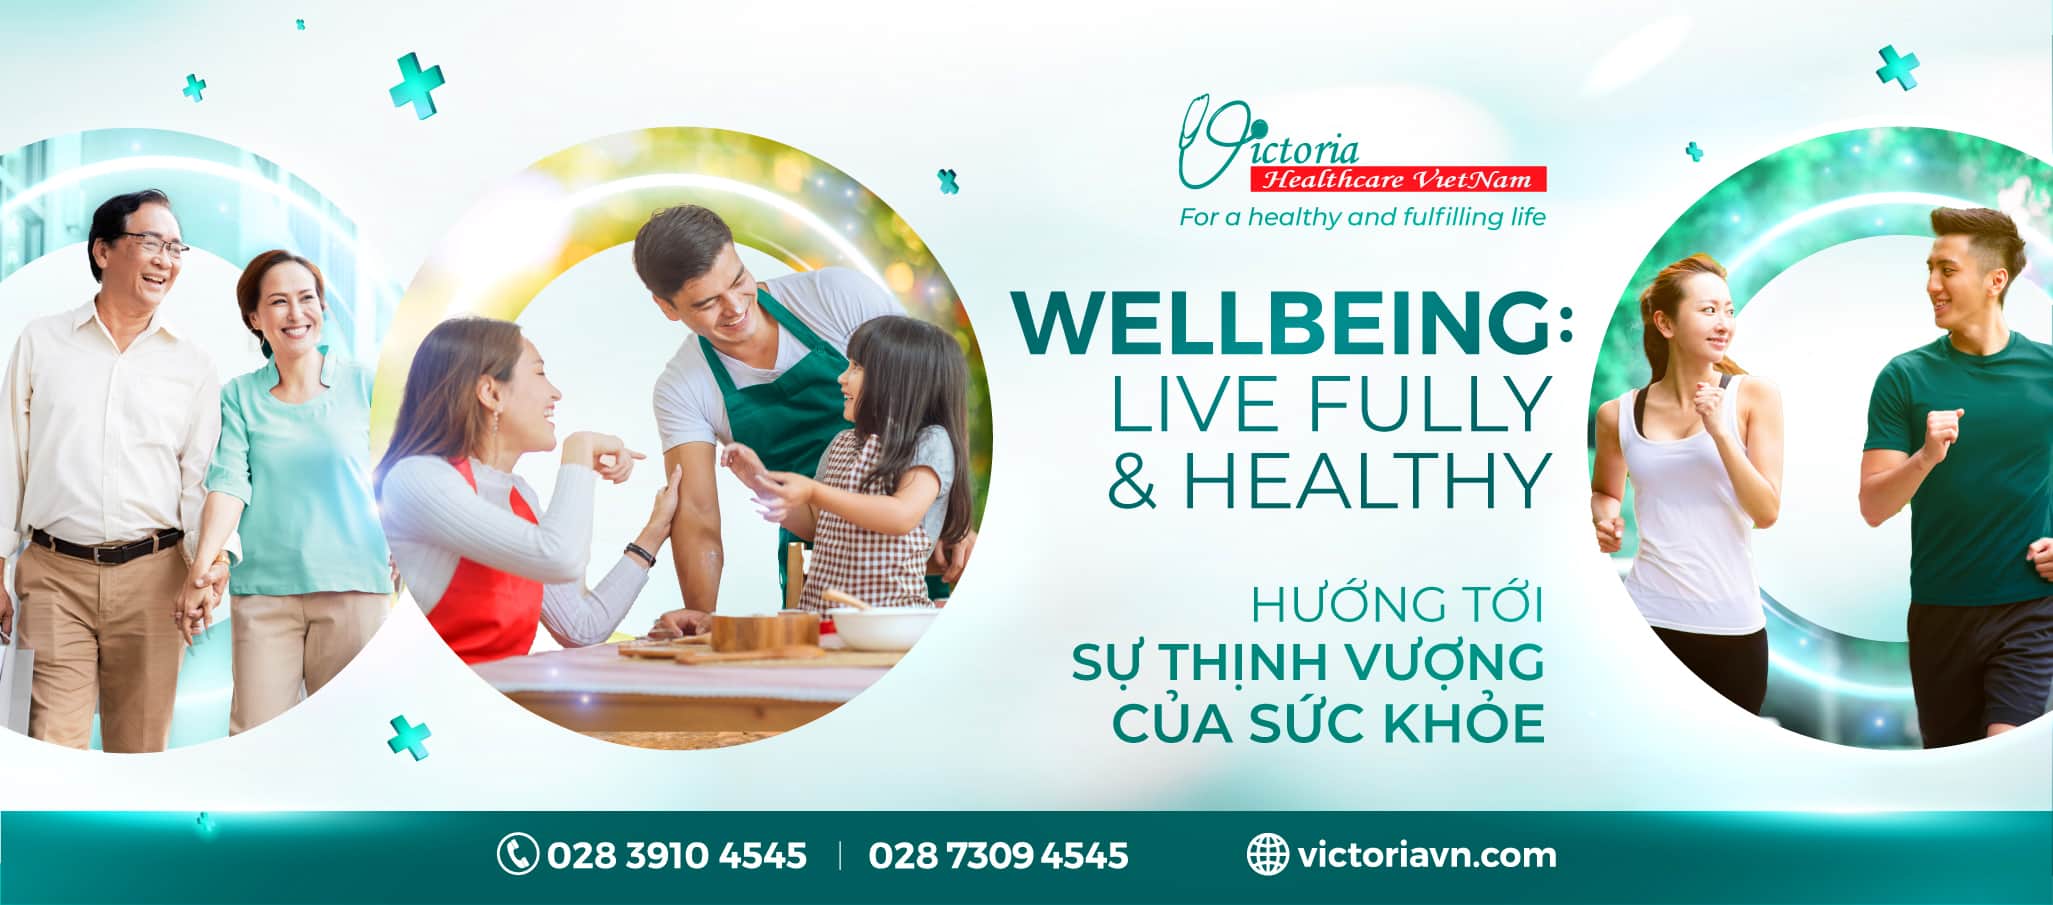 WELLNESS - FOR A HEALTHY AND FULFILLING LIFE